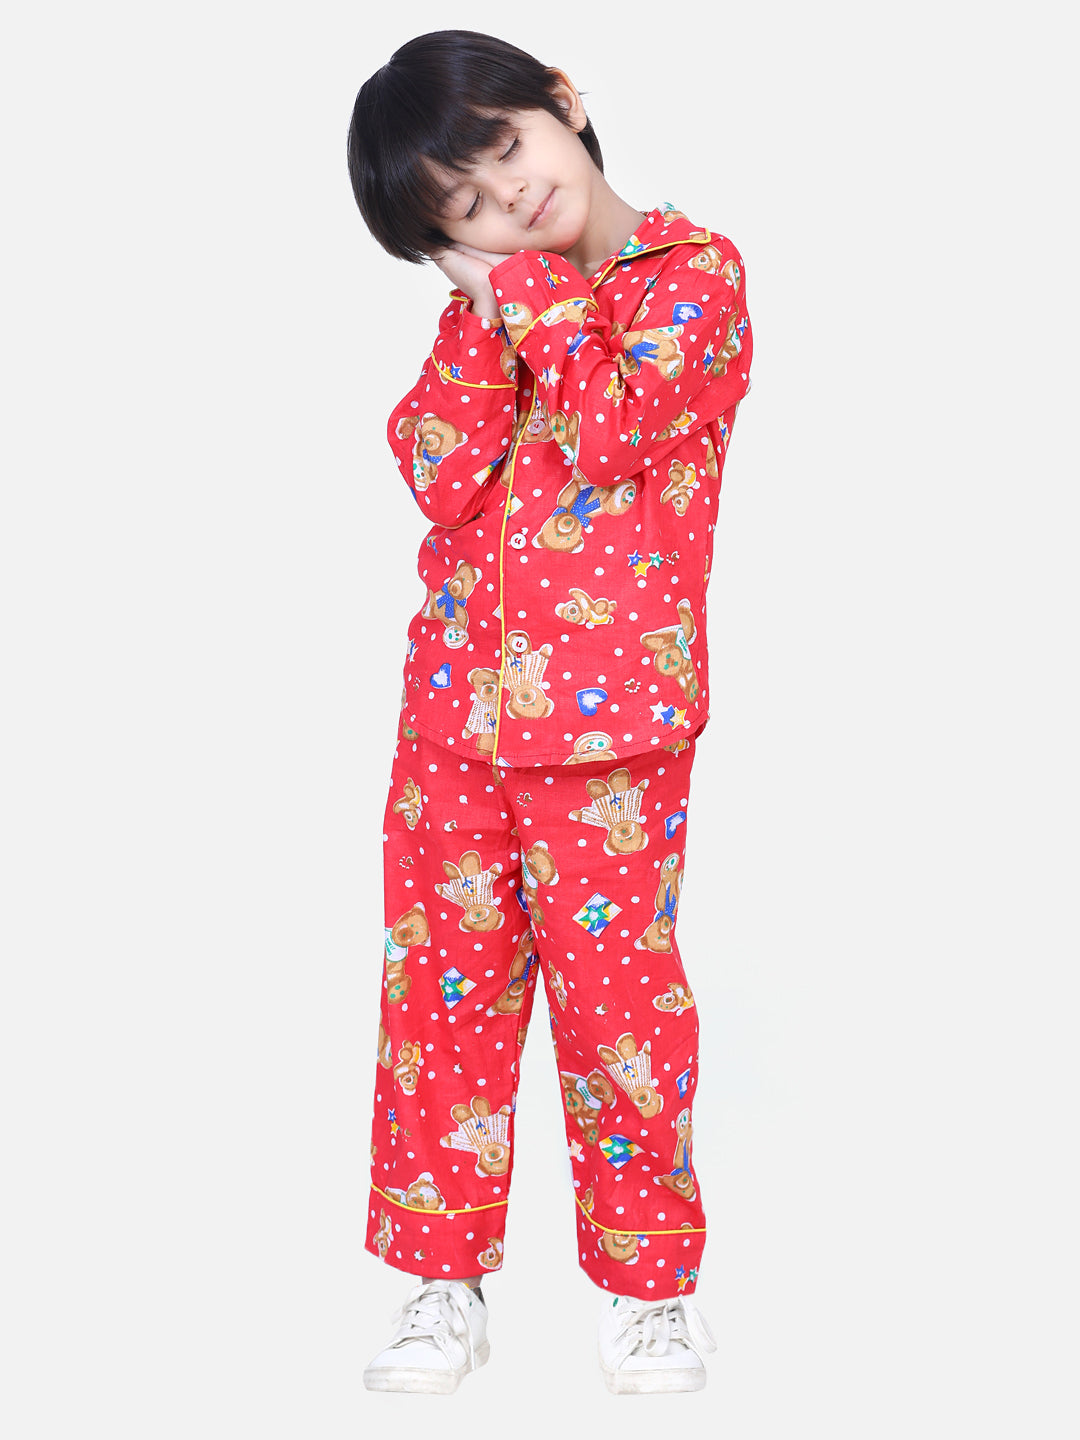 BownBee Full Sleeve Printed Night Suit- Red